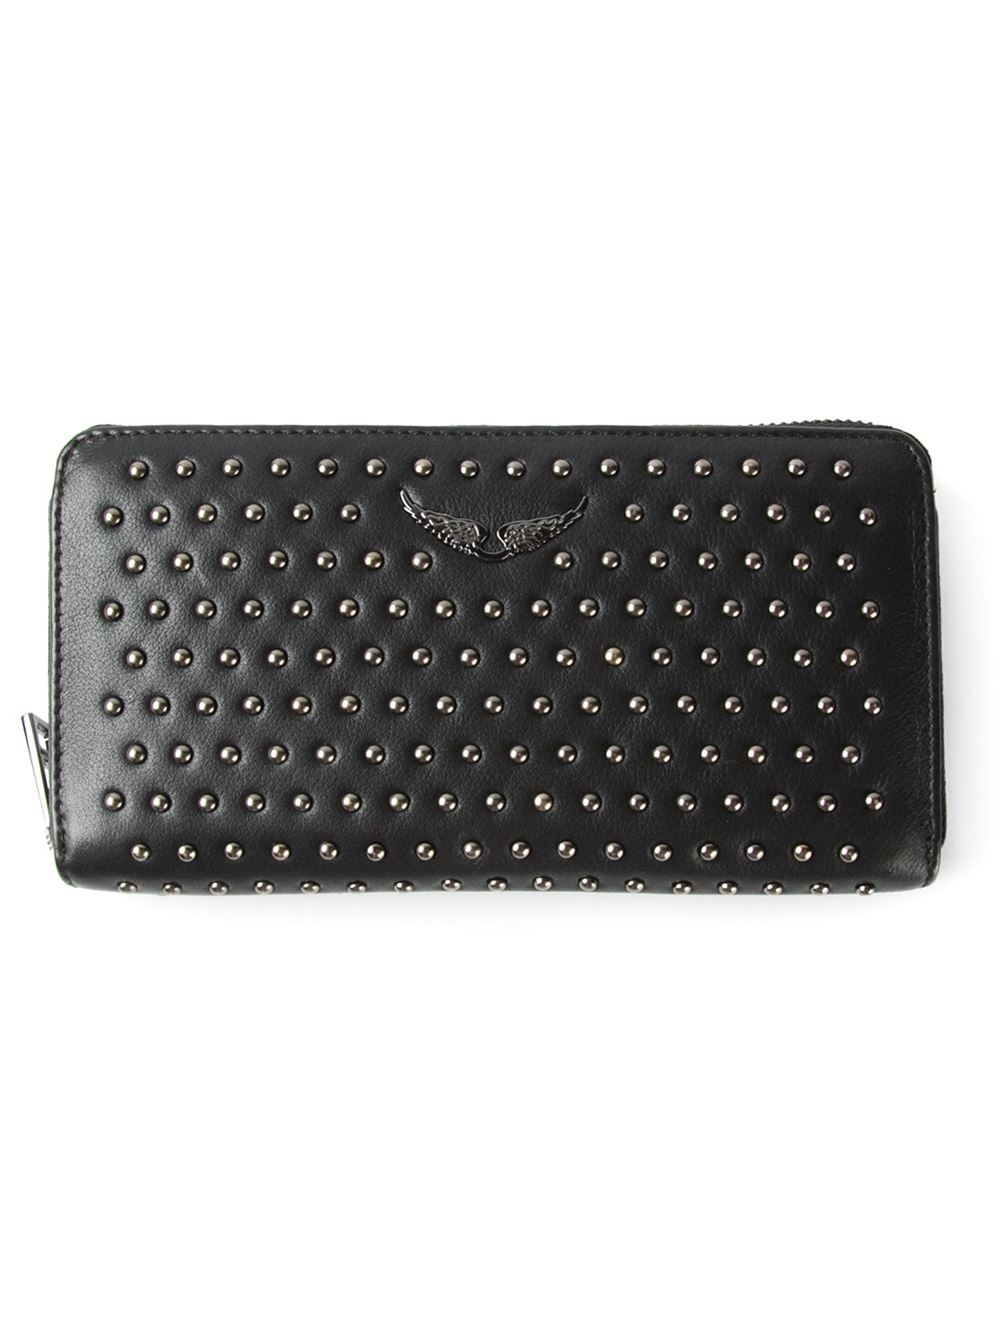 Zadig & Voltaire 'Compagnon' Studded Wallet in Black | Lyst